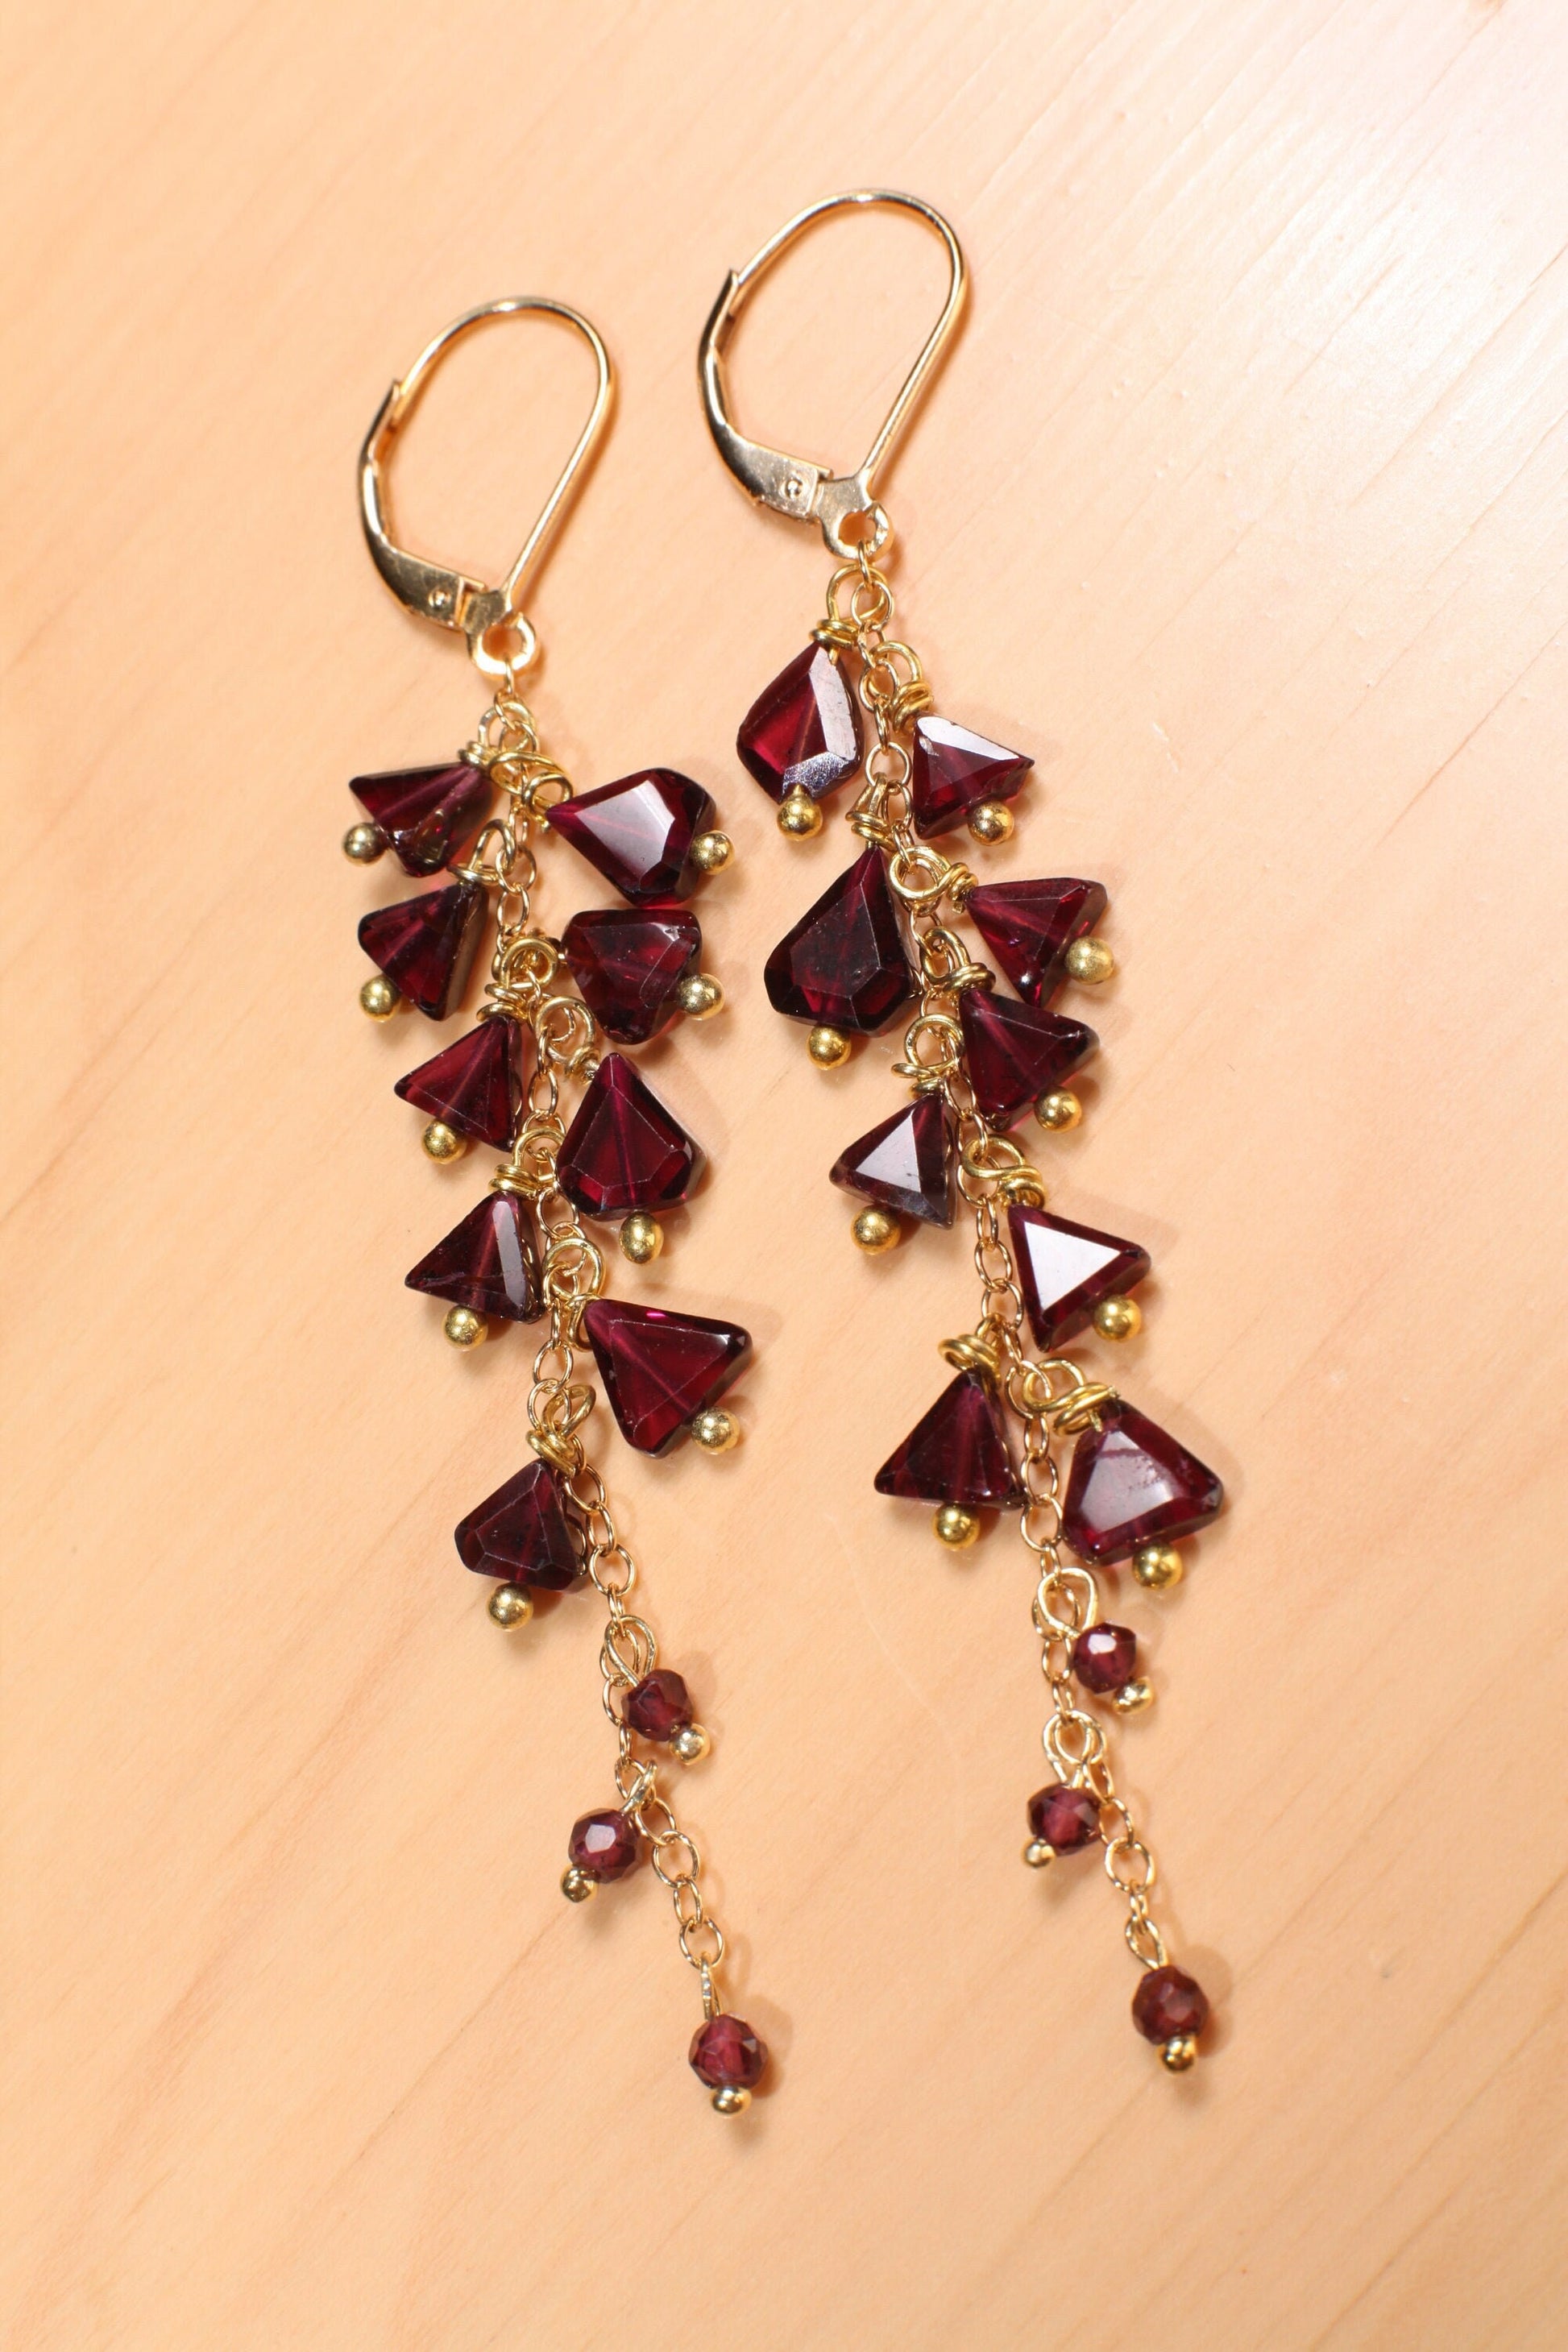 Genuine Garnet Faceted Merlot Red Cascade and Dangling Wire Wrap Handmade 14K Gold Filled or Sterling silver Leverback Earrings, Bridal gift